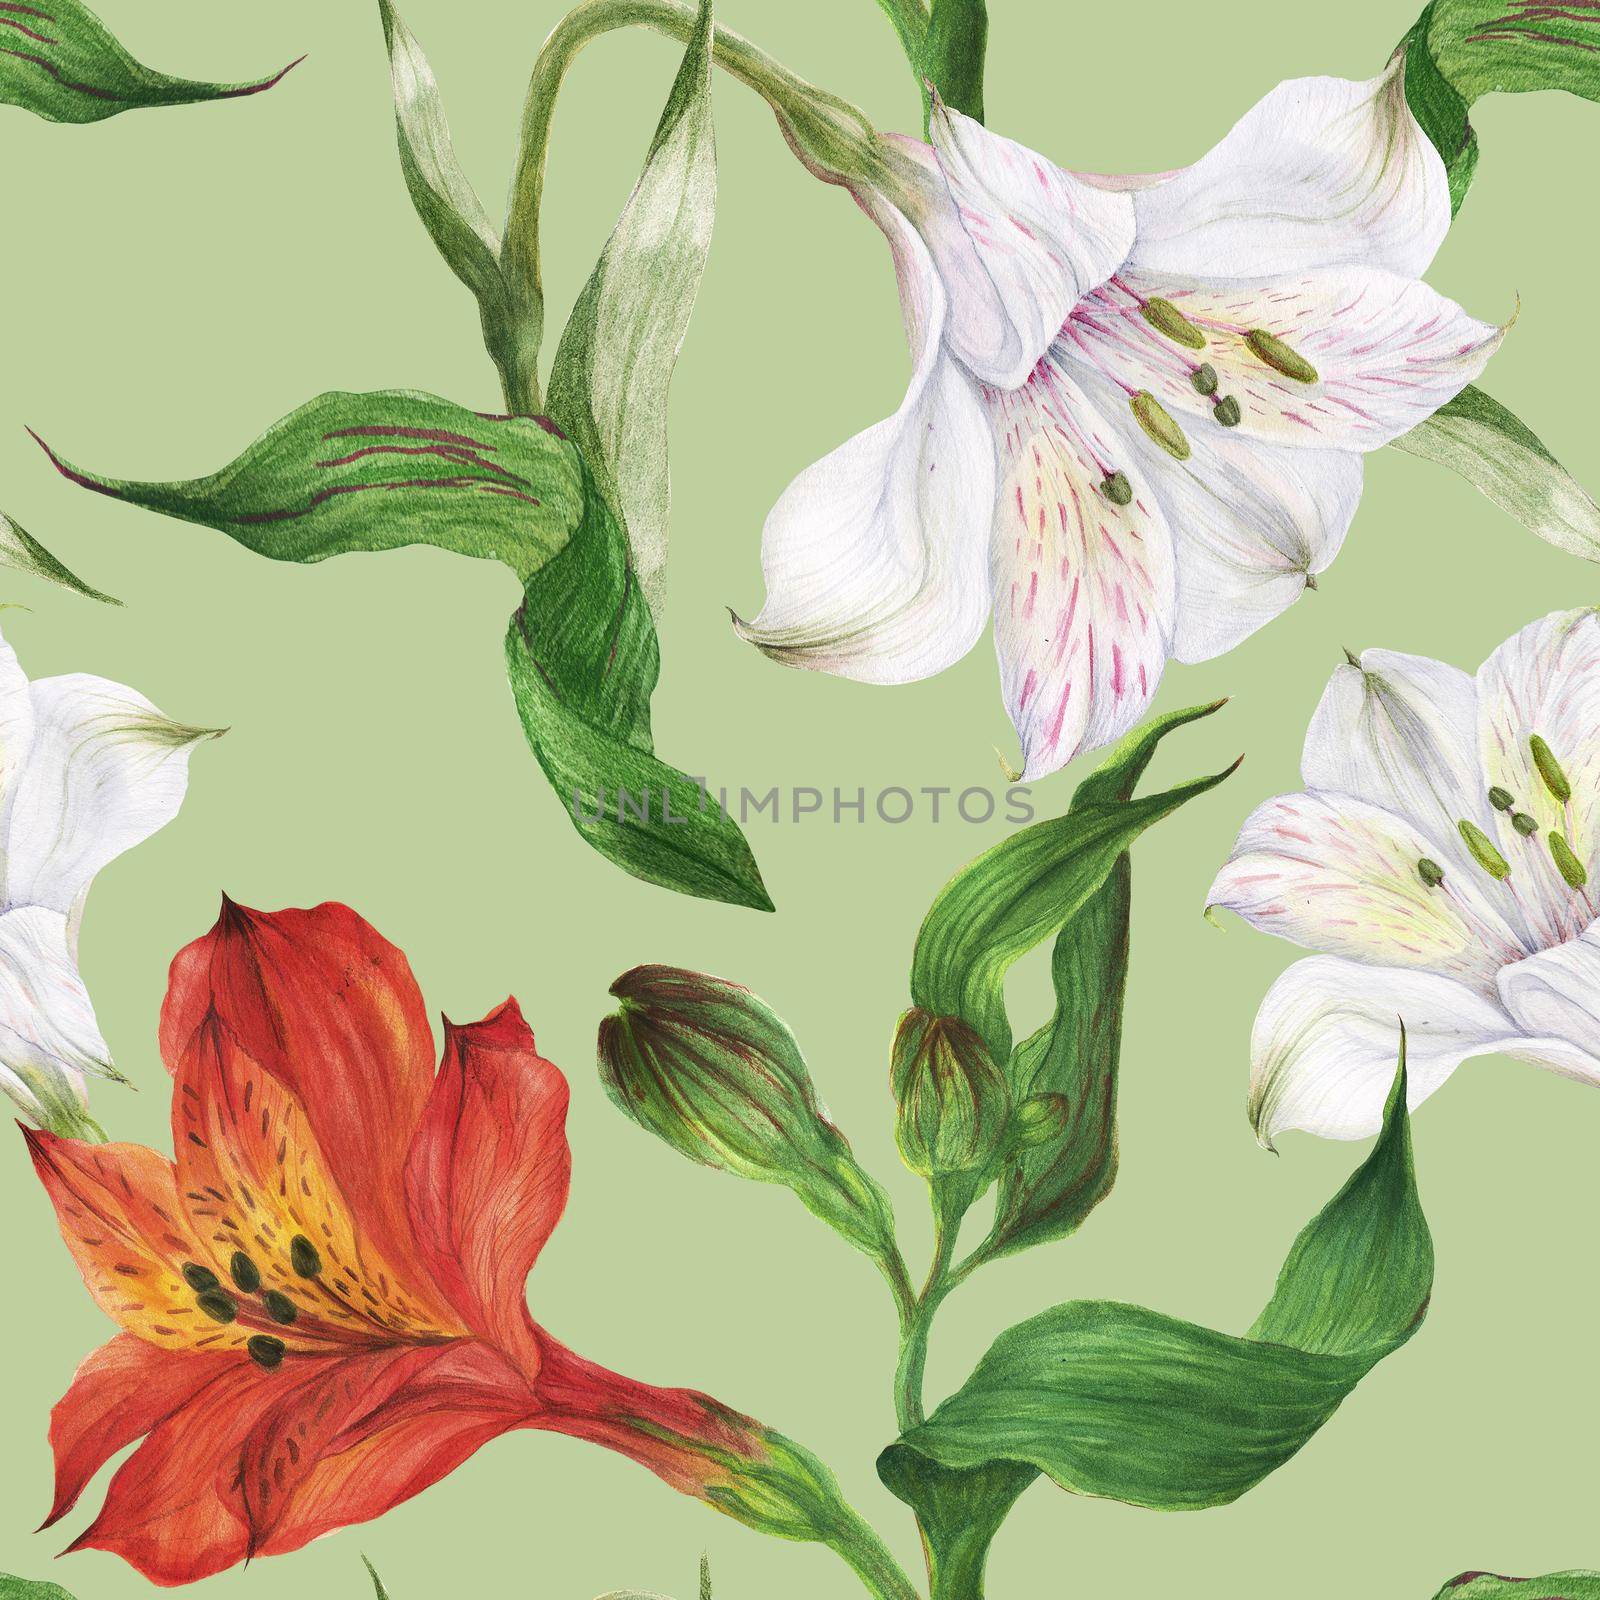 Floral watercolor seamless pattern with red and white alstroemeria on a green by Xeniasnowstorm